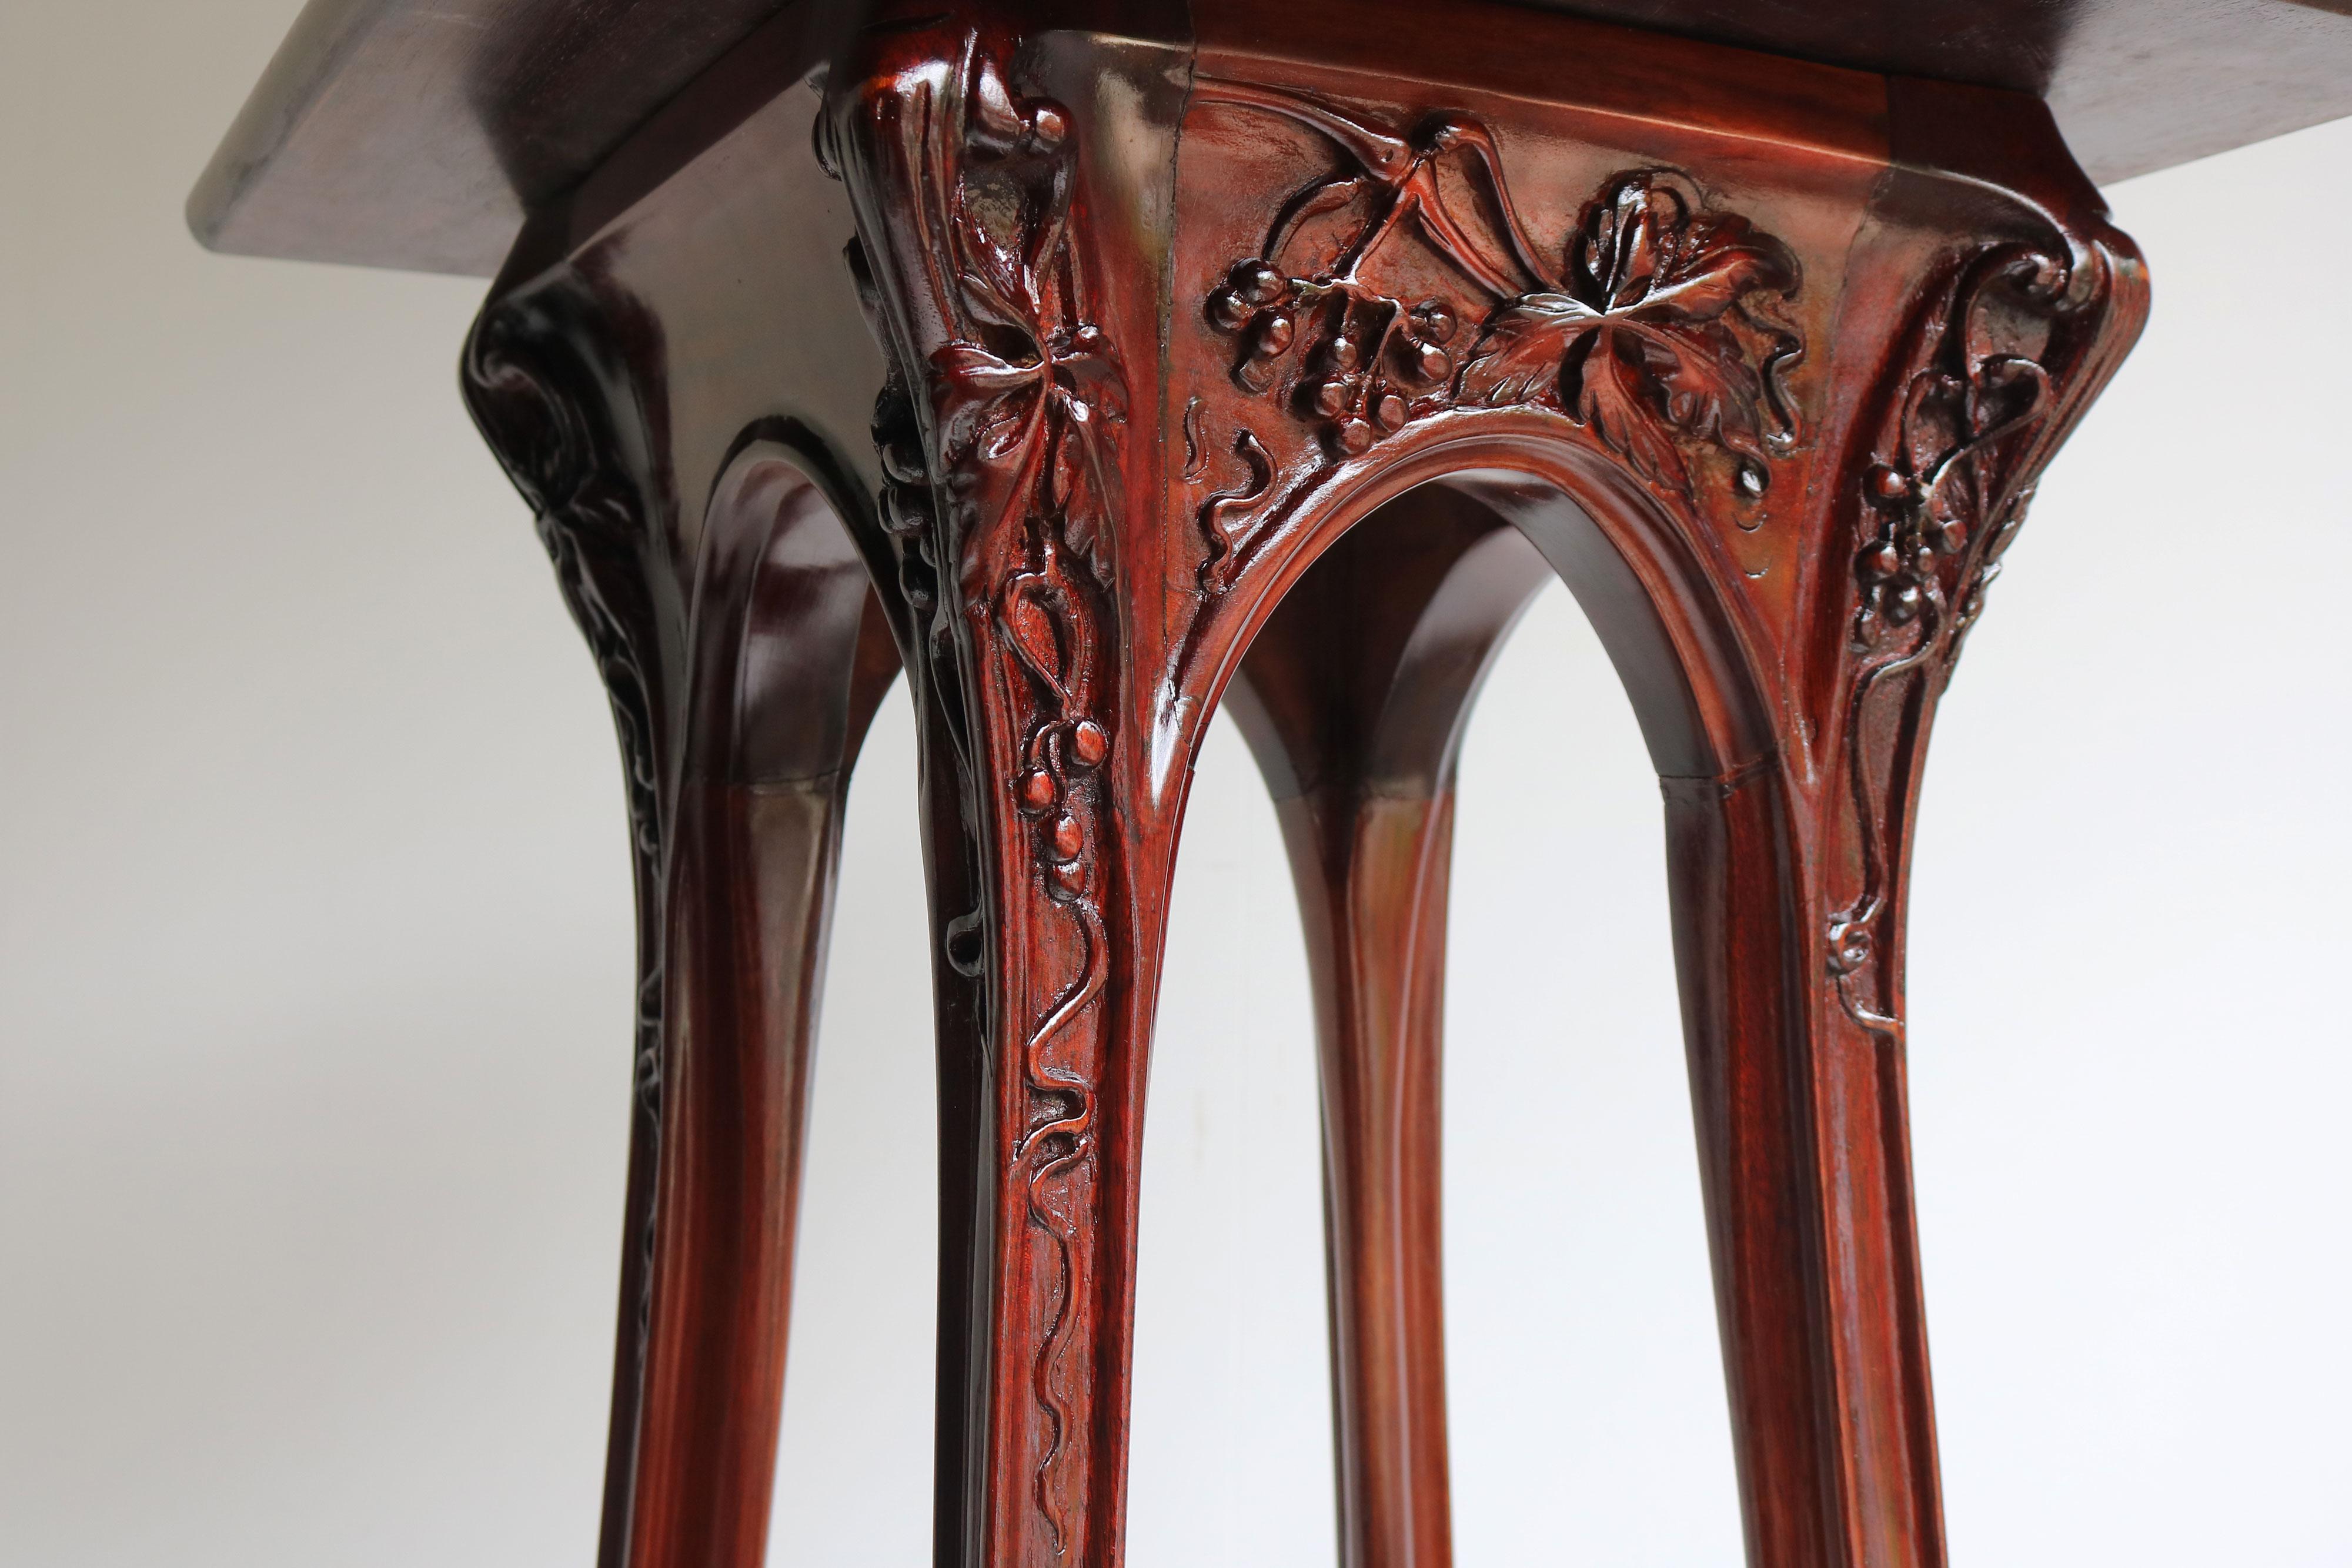 Exquisite set of 4 matching stylized Art Nouveau plant stands / pedestals by Louis Majorelle designed in 1907 with carved ''Vigne Vierge'' decorations.
Each pedestal has 3 tiers and the top tiers rotate 360 degrees. Exquisite crafted and fully hand